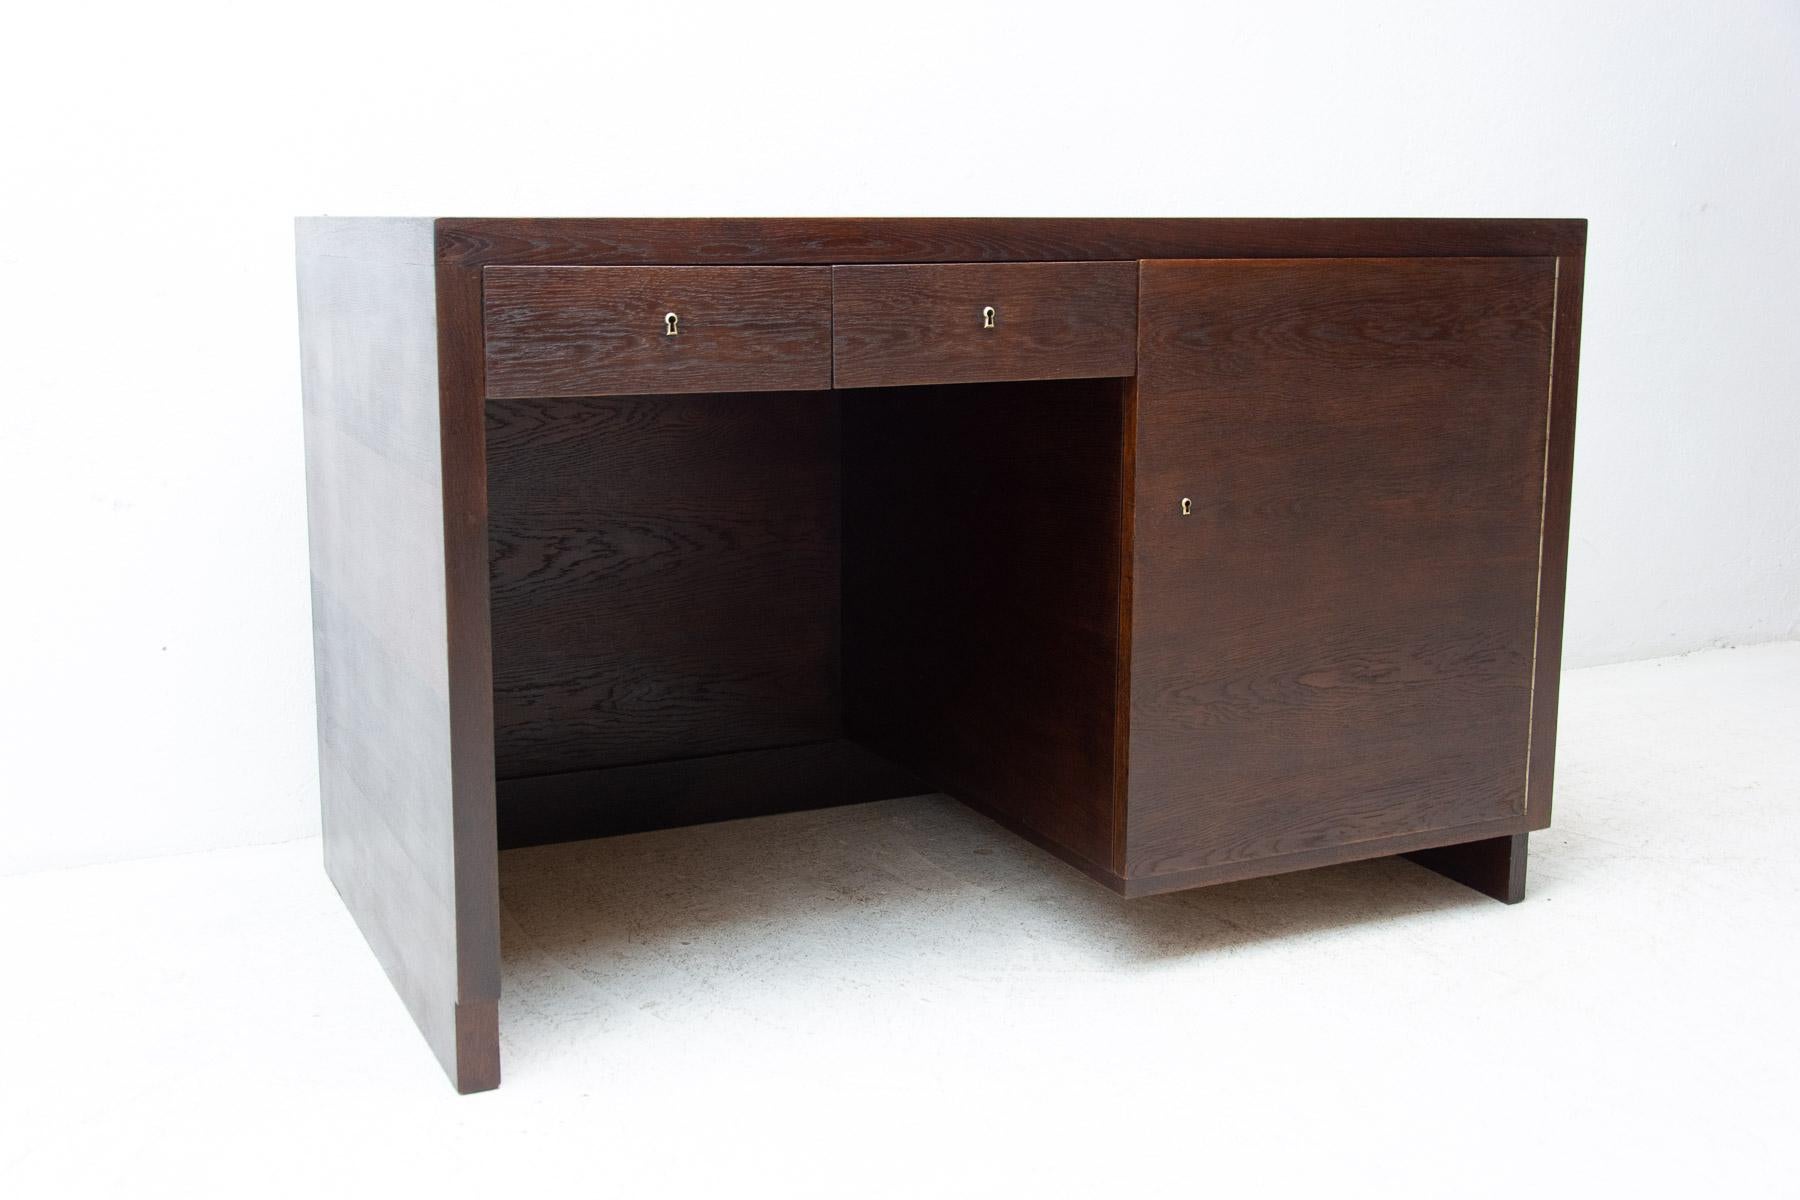 This massive functionalistic writing desk was made in the 1930s in Bohemia. It is veneered with oak veneer. Very interesting design typical for the functionalist period of the 1930s. The table is in very good condition, fully renovated.

Measures: